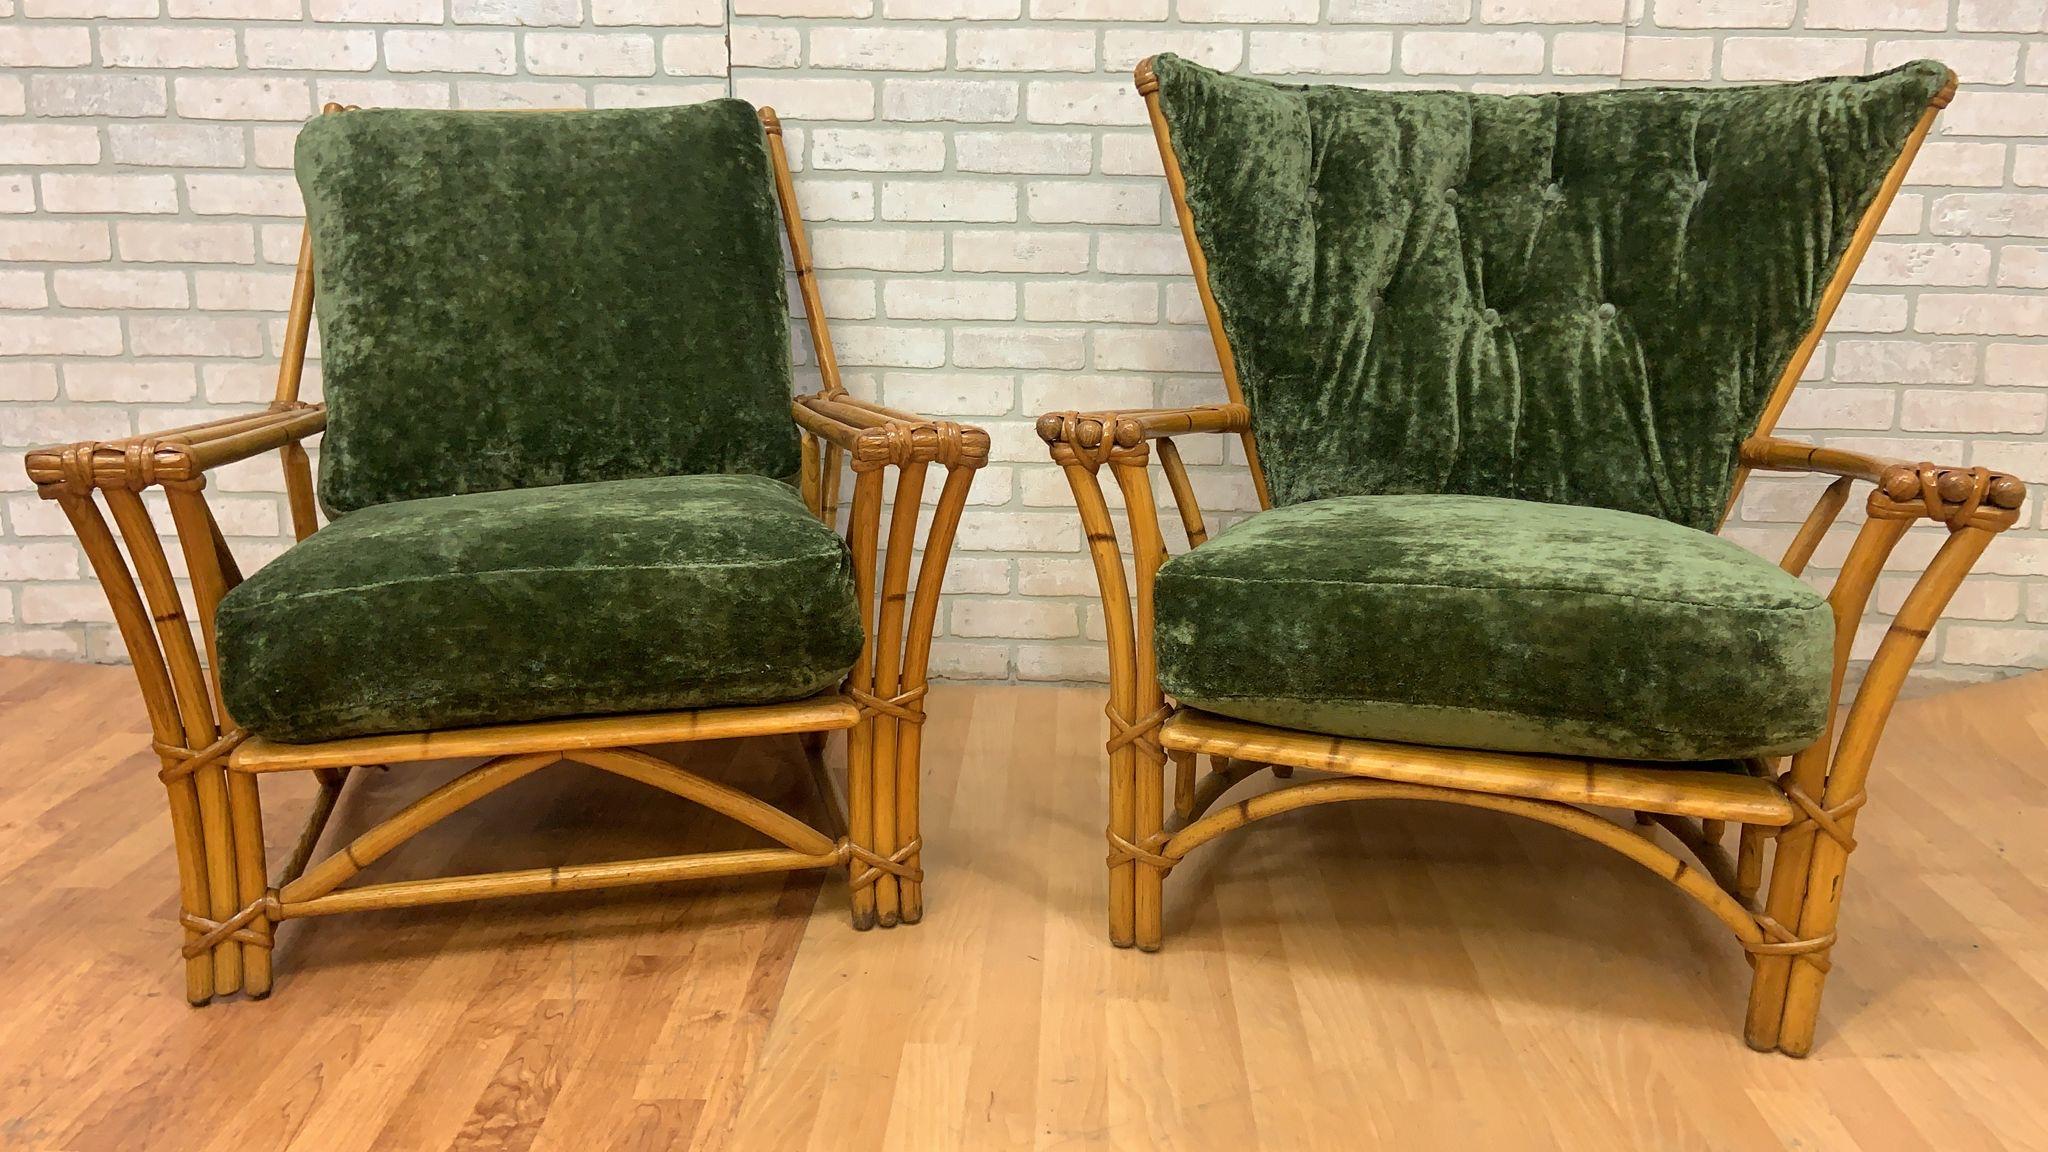 MCM Heywood Wakefield Ashcraft Rattan Lounge Chairs Newly Upholstered - Set of 2 In Good Condition For Sale In Chicago, IL